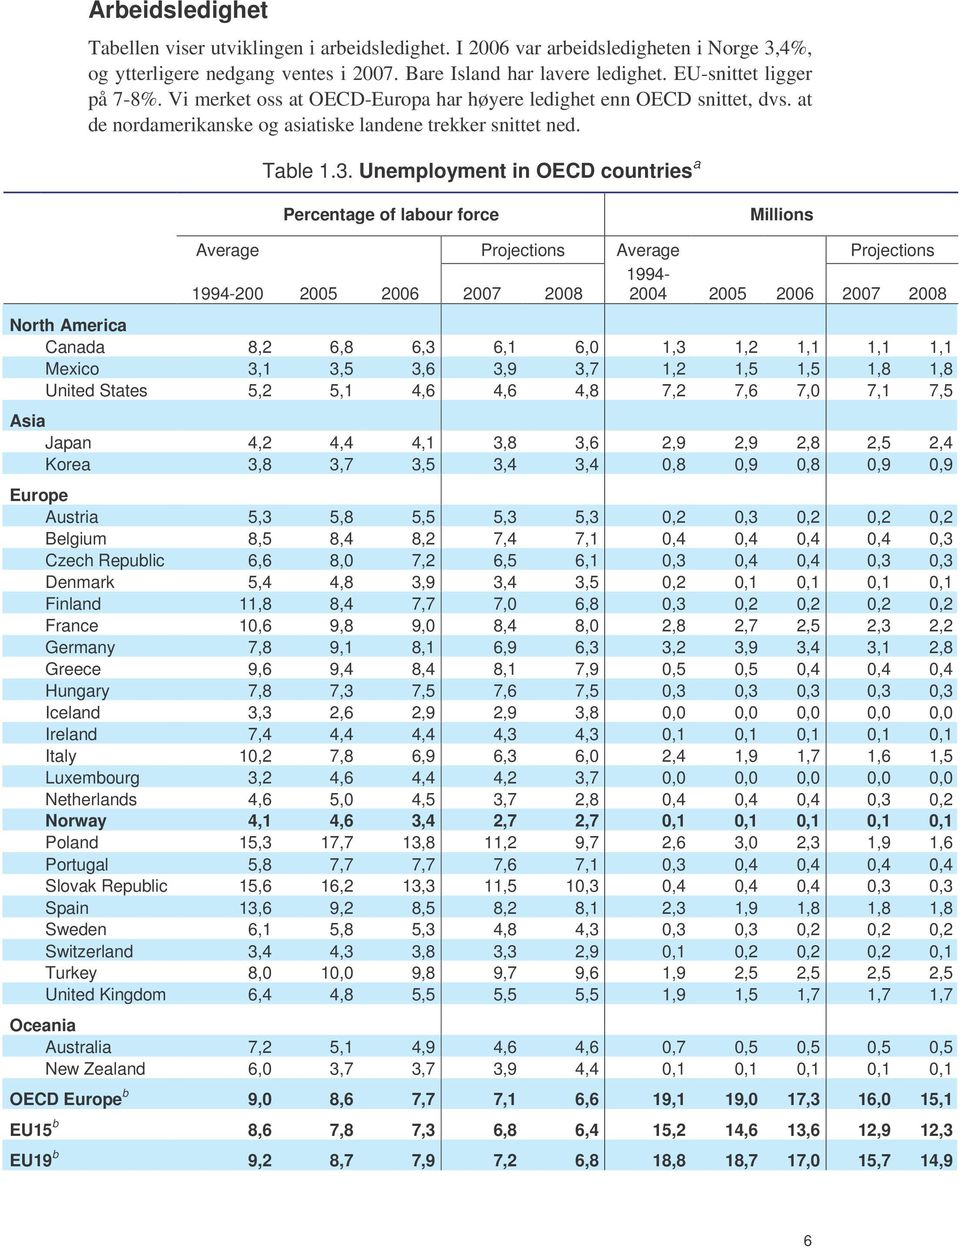 Unemployment in OECD countries a Percentage of labour force Millions Average Projections Average Projections 1994 1994200 2005 2006 2007 2008 2004 2005 2006 2007 2008 North America Canada 8,2 6,8 6,3